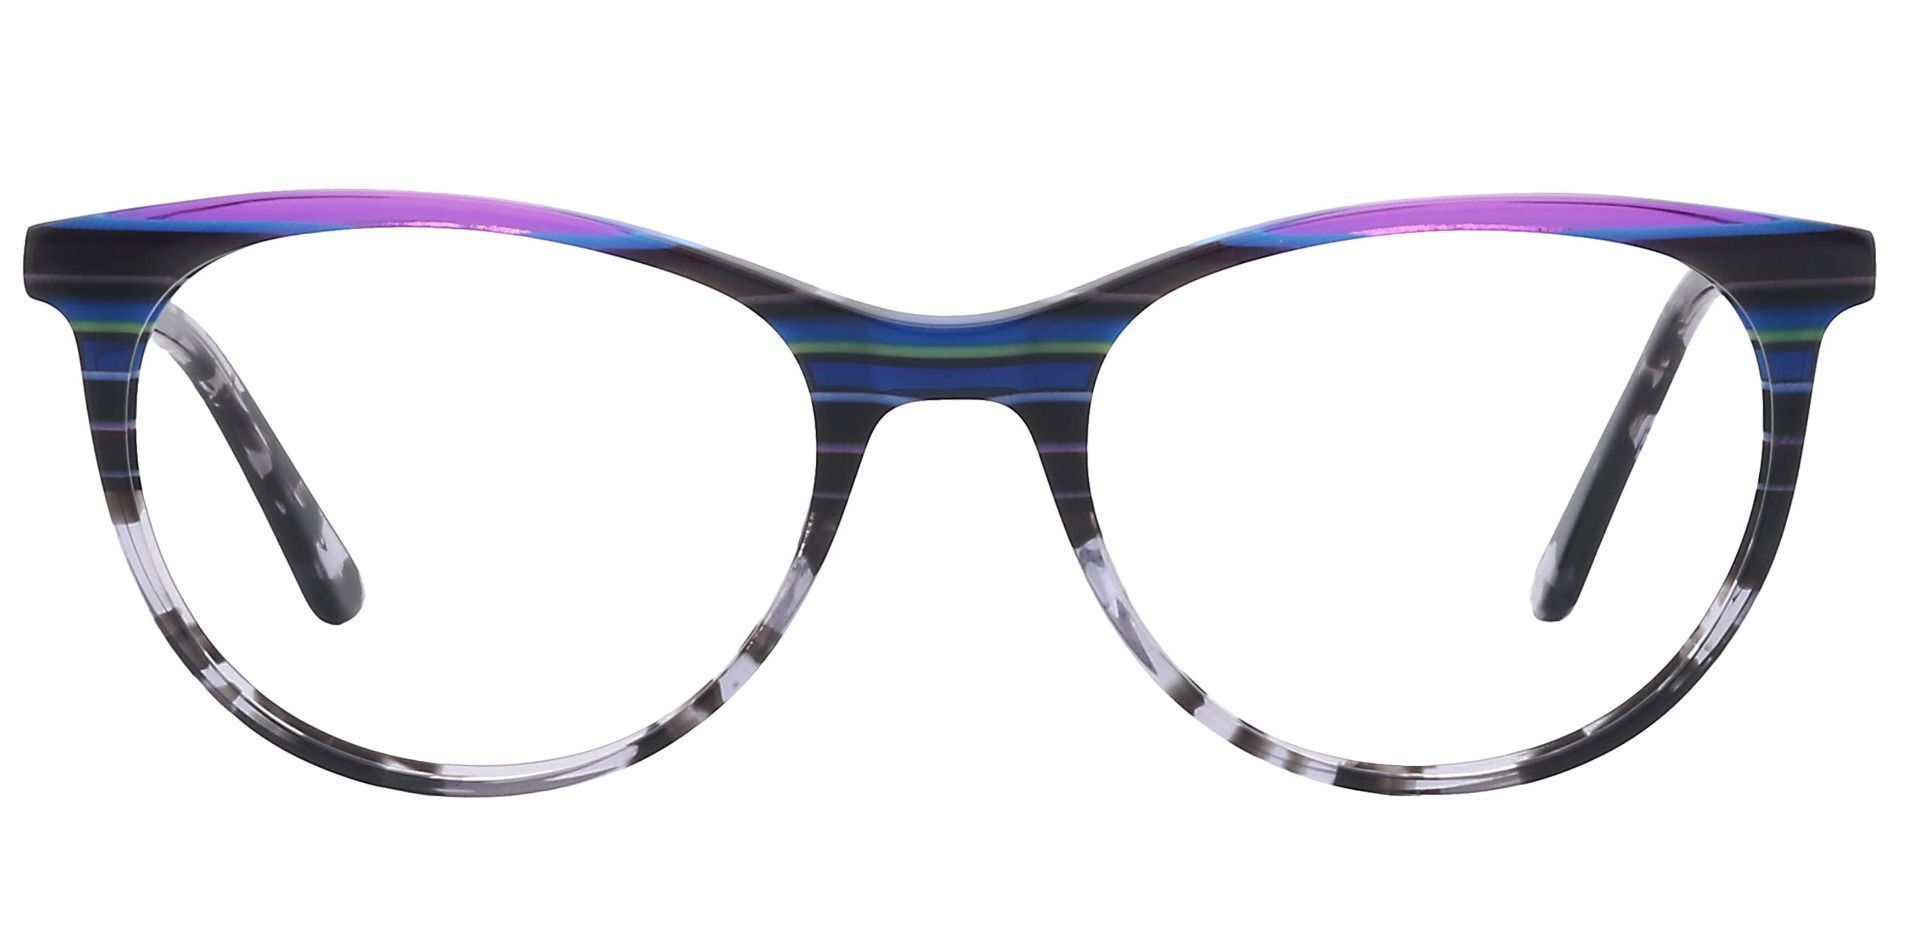 Patagonia Oval Lined Bifocal Glasses - Multicolored Blue Stripes  Multicolor